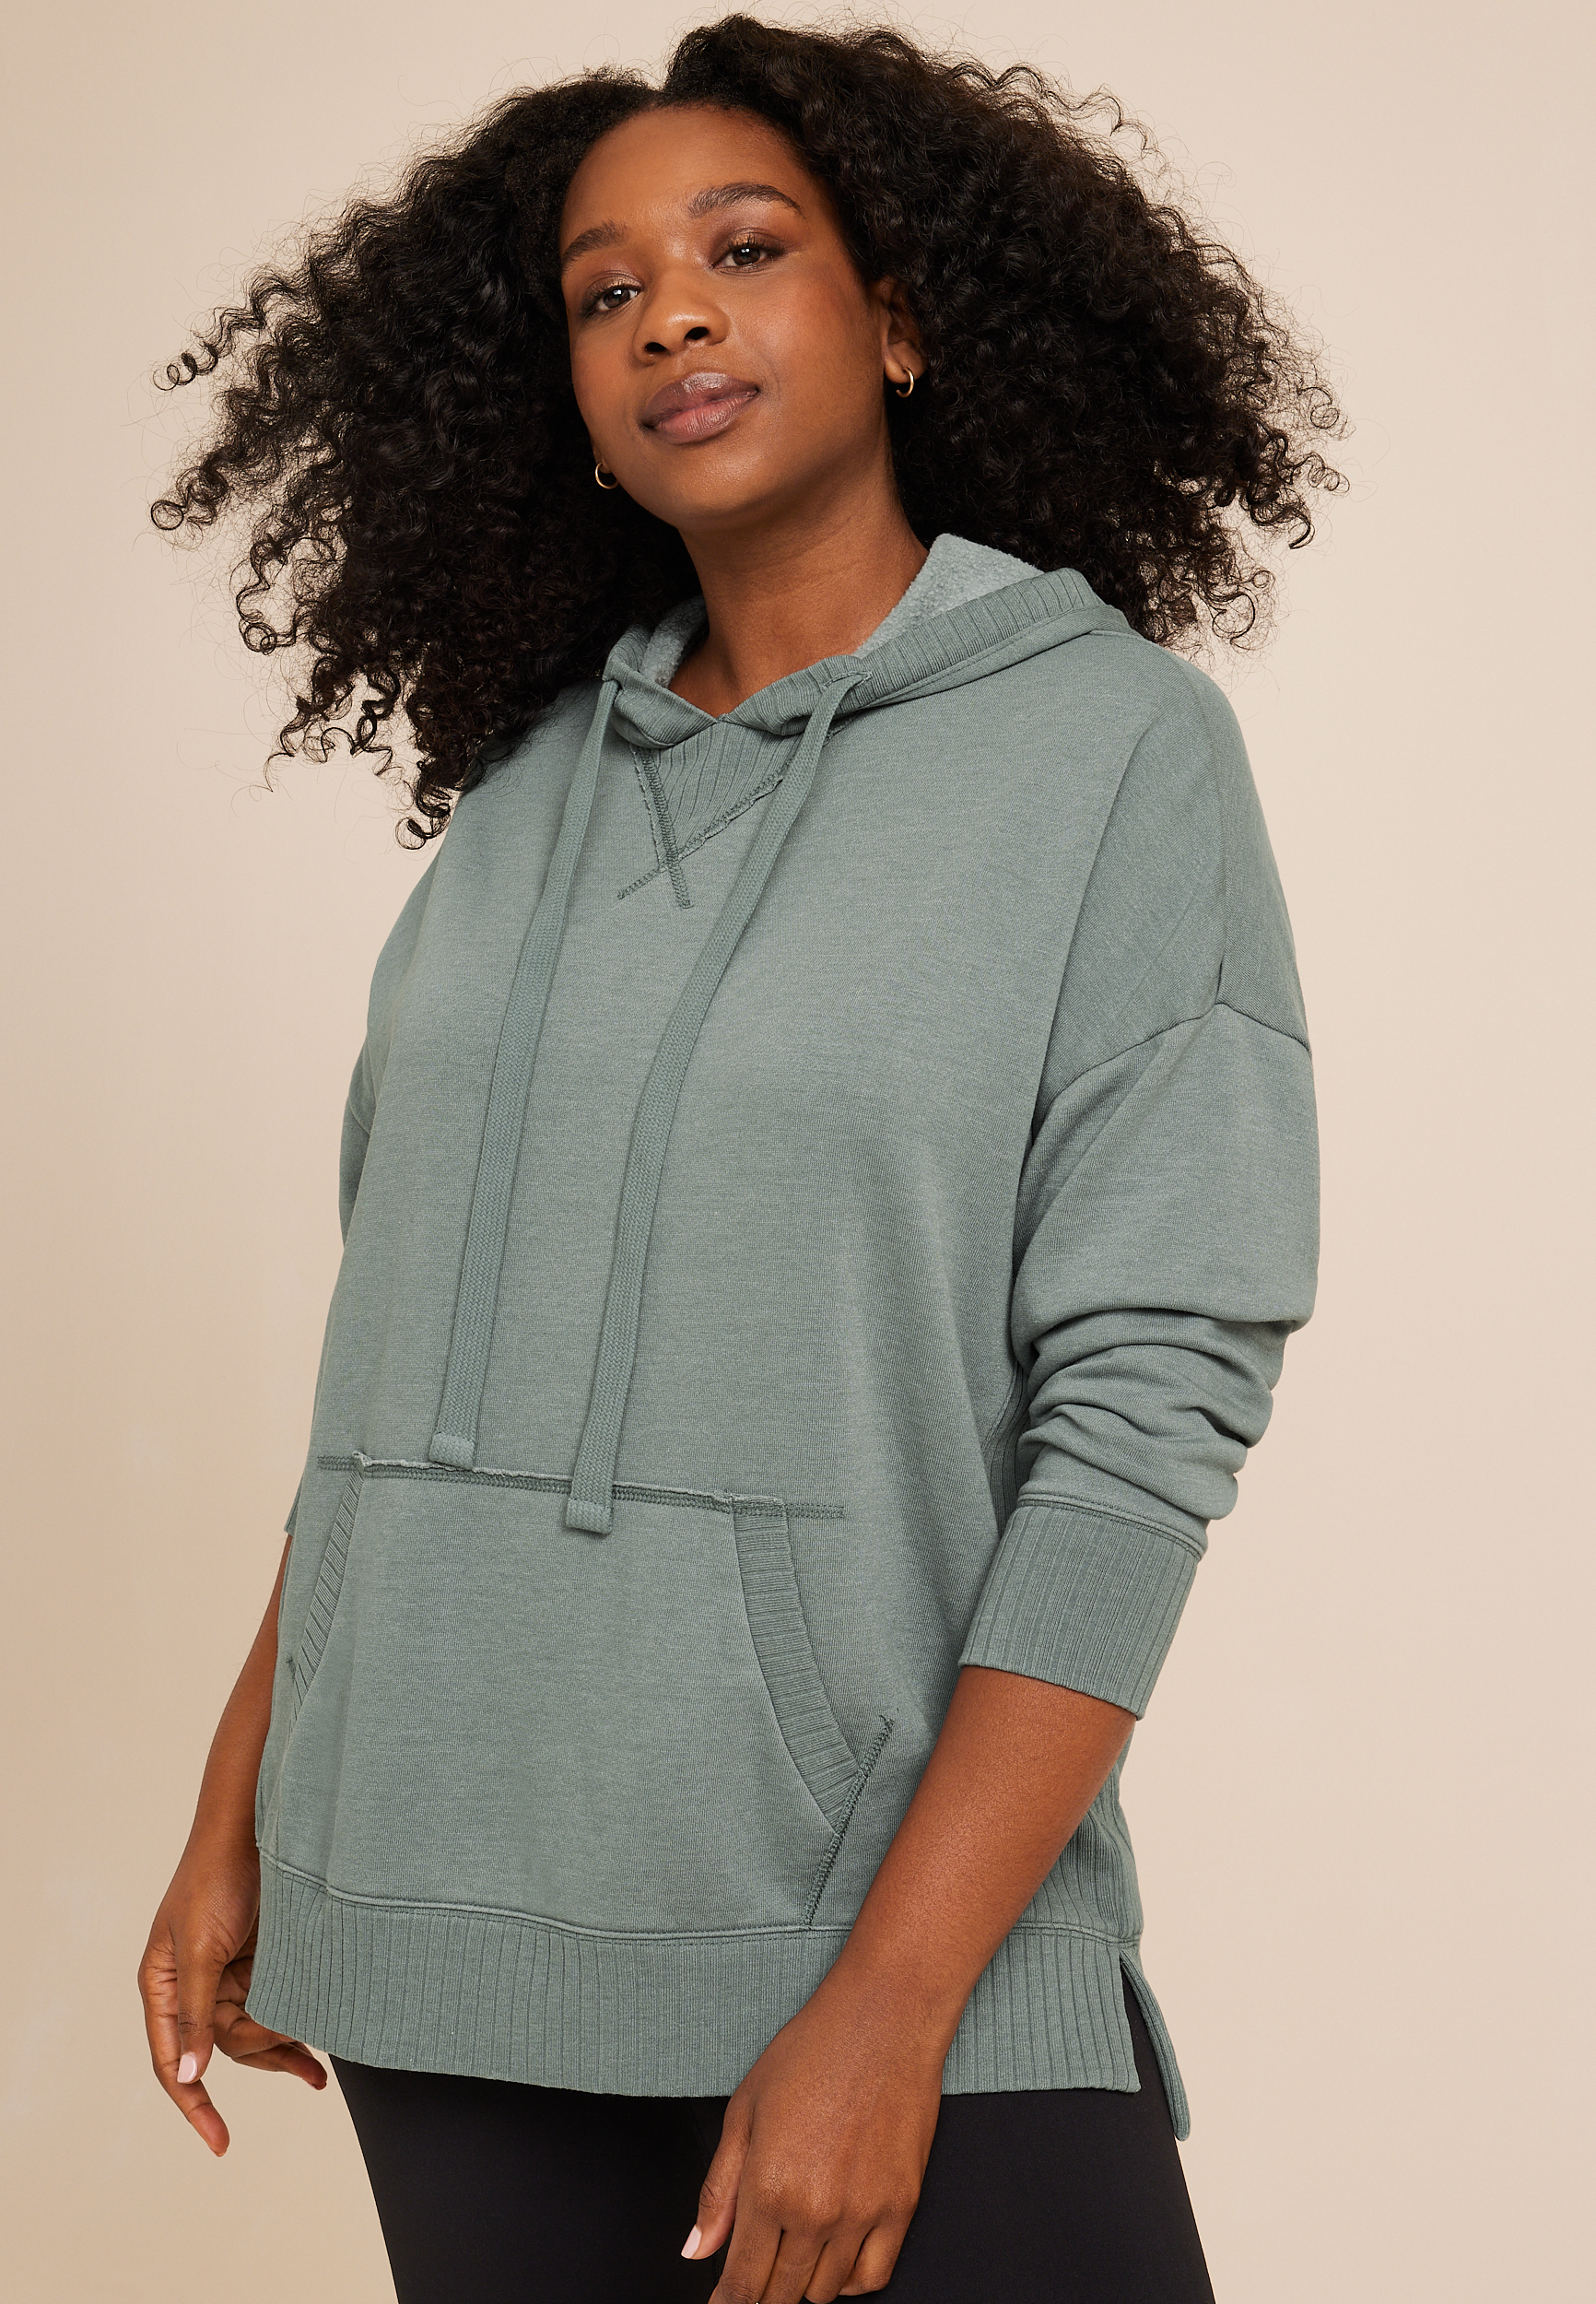 Plus Size Sweatshirts & Hoodies For Women maurices